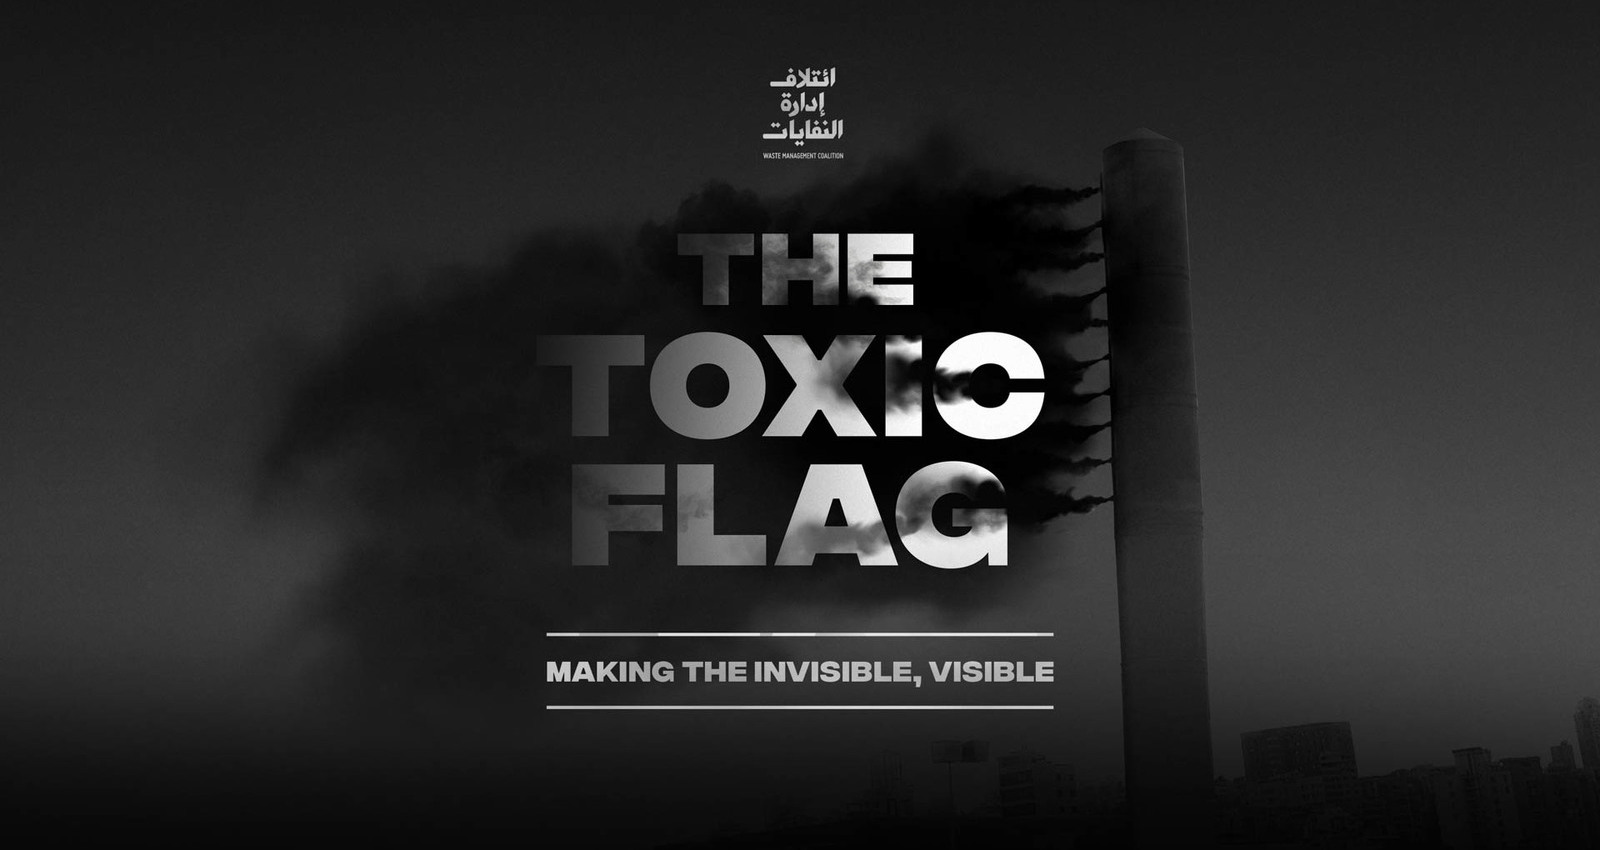 The Toxic Flag